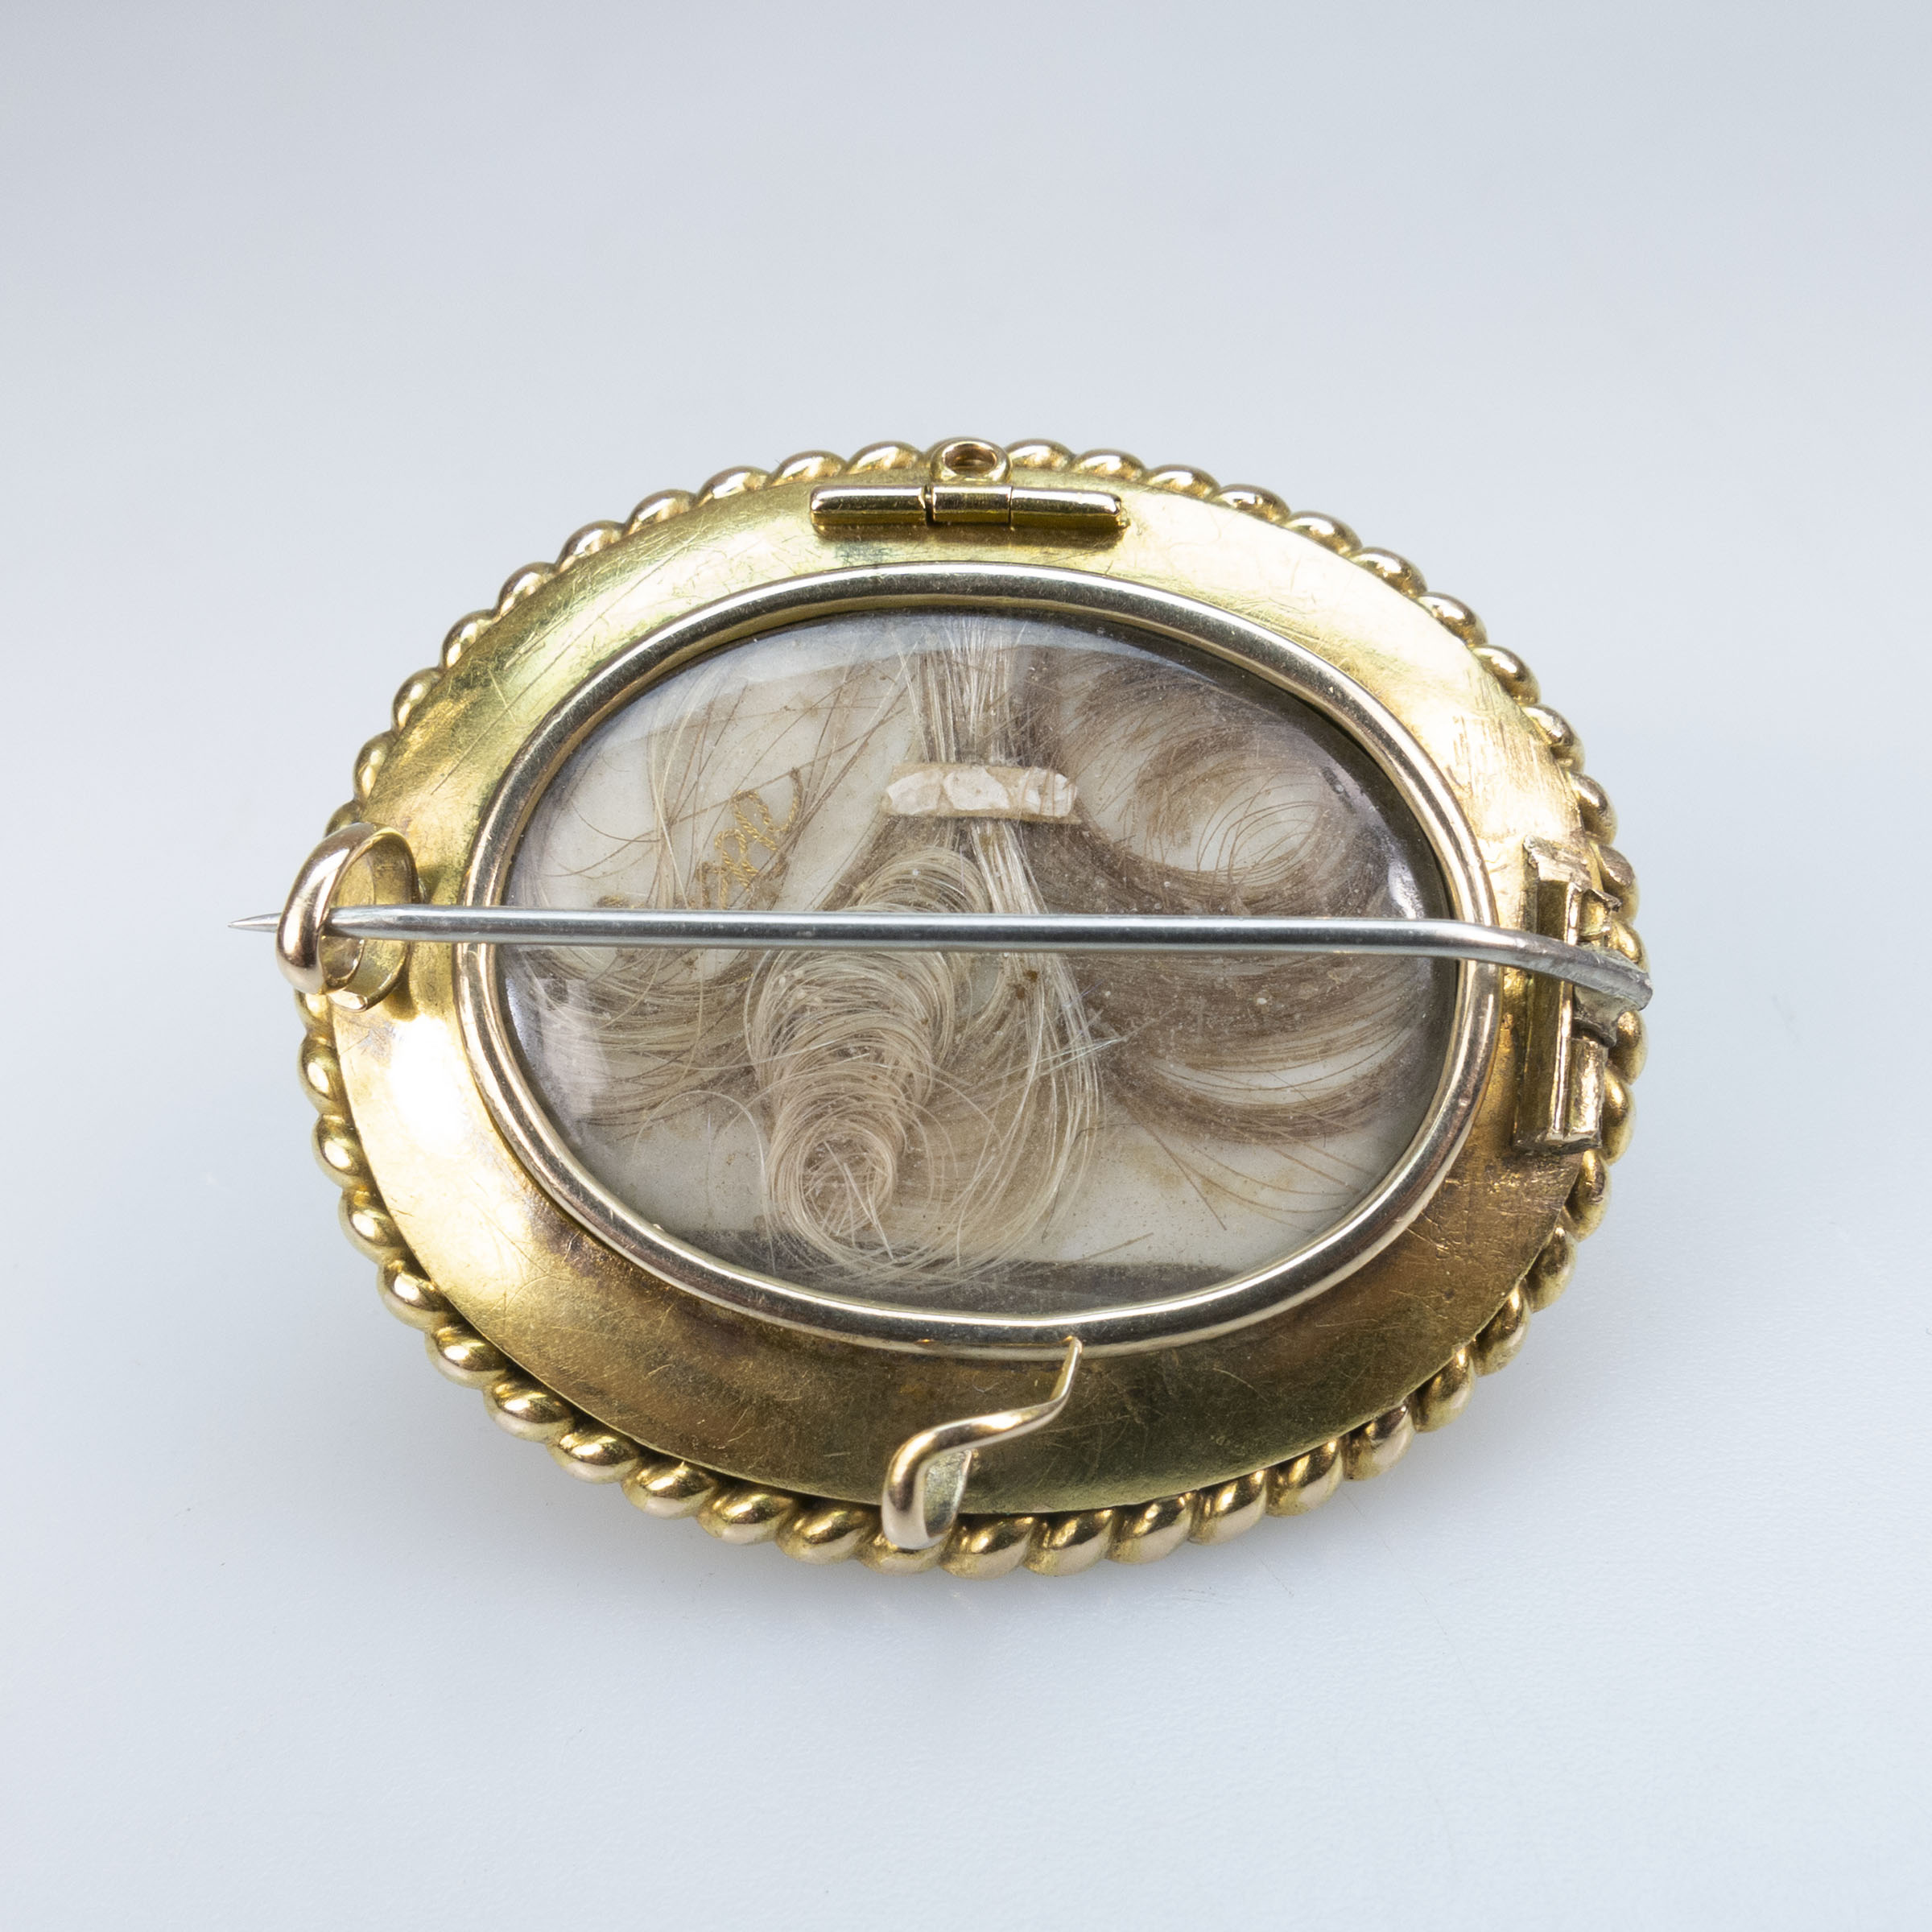 Late 19th Century 14k Yellow Gold & Gold-Filled Mourning Brooch/Pendant